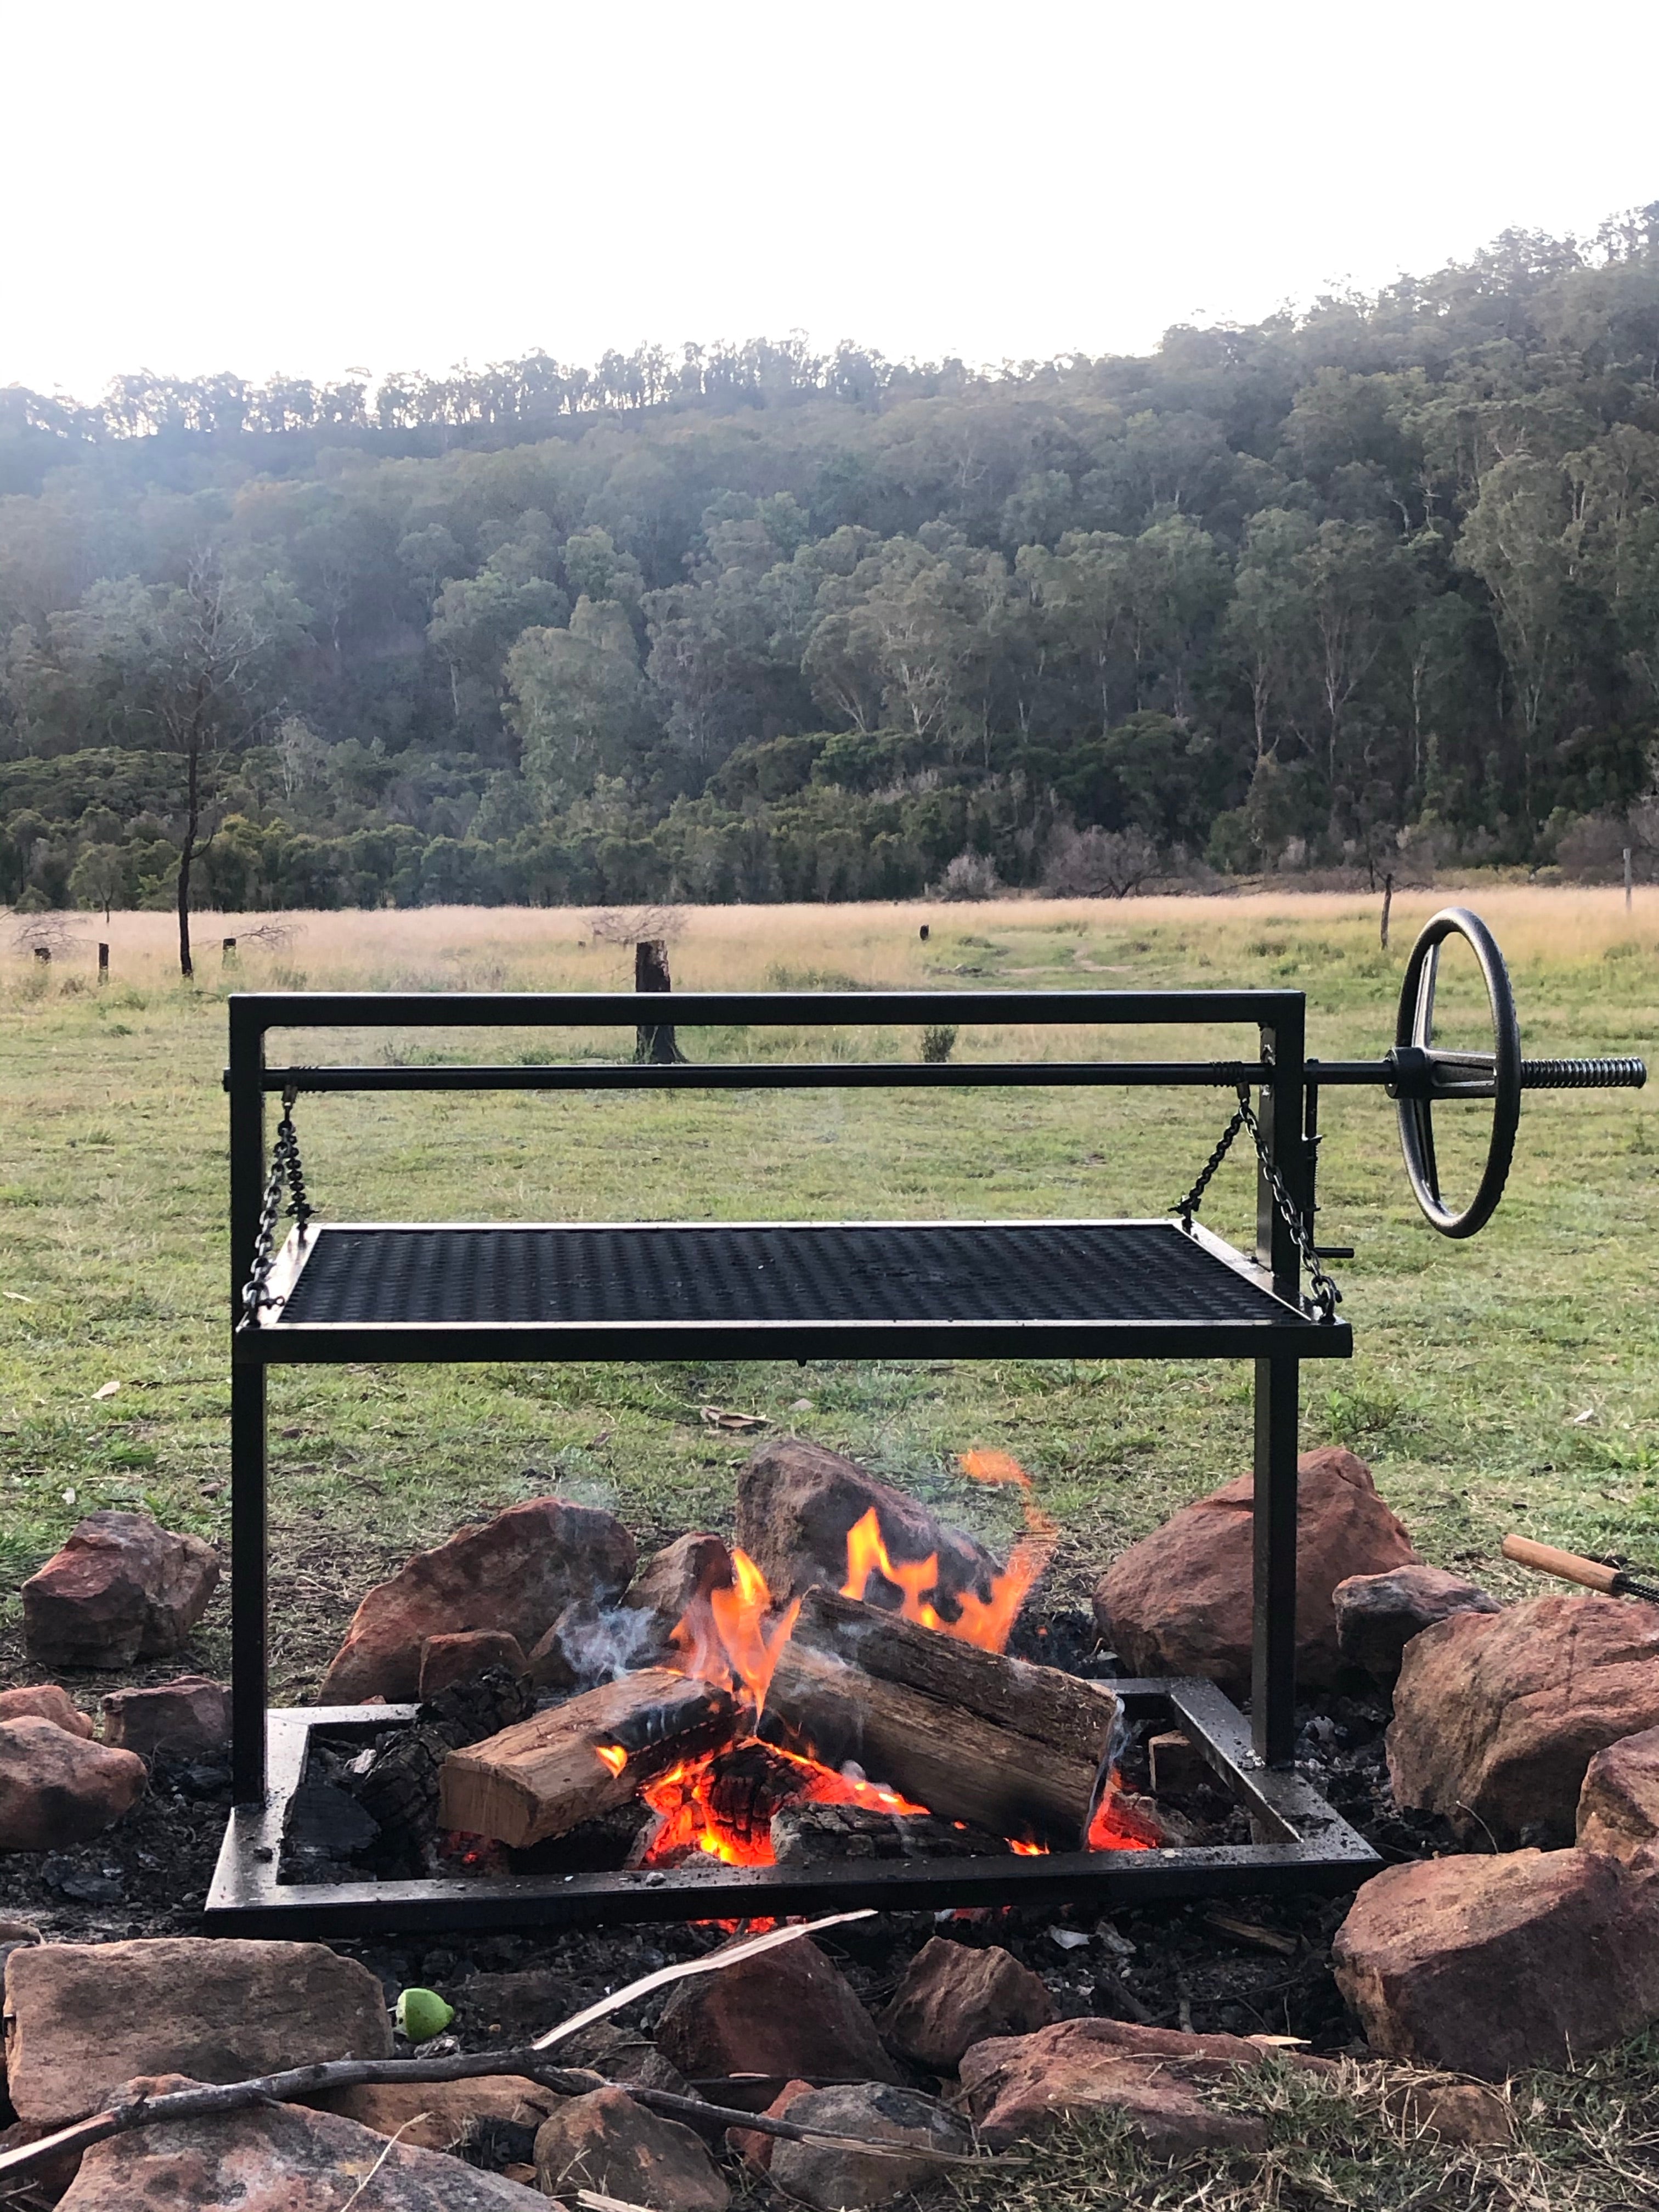 Portable charcoal parrilla BBQ perfect for fire pits and camping